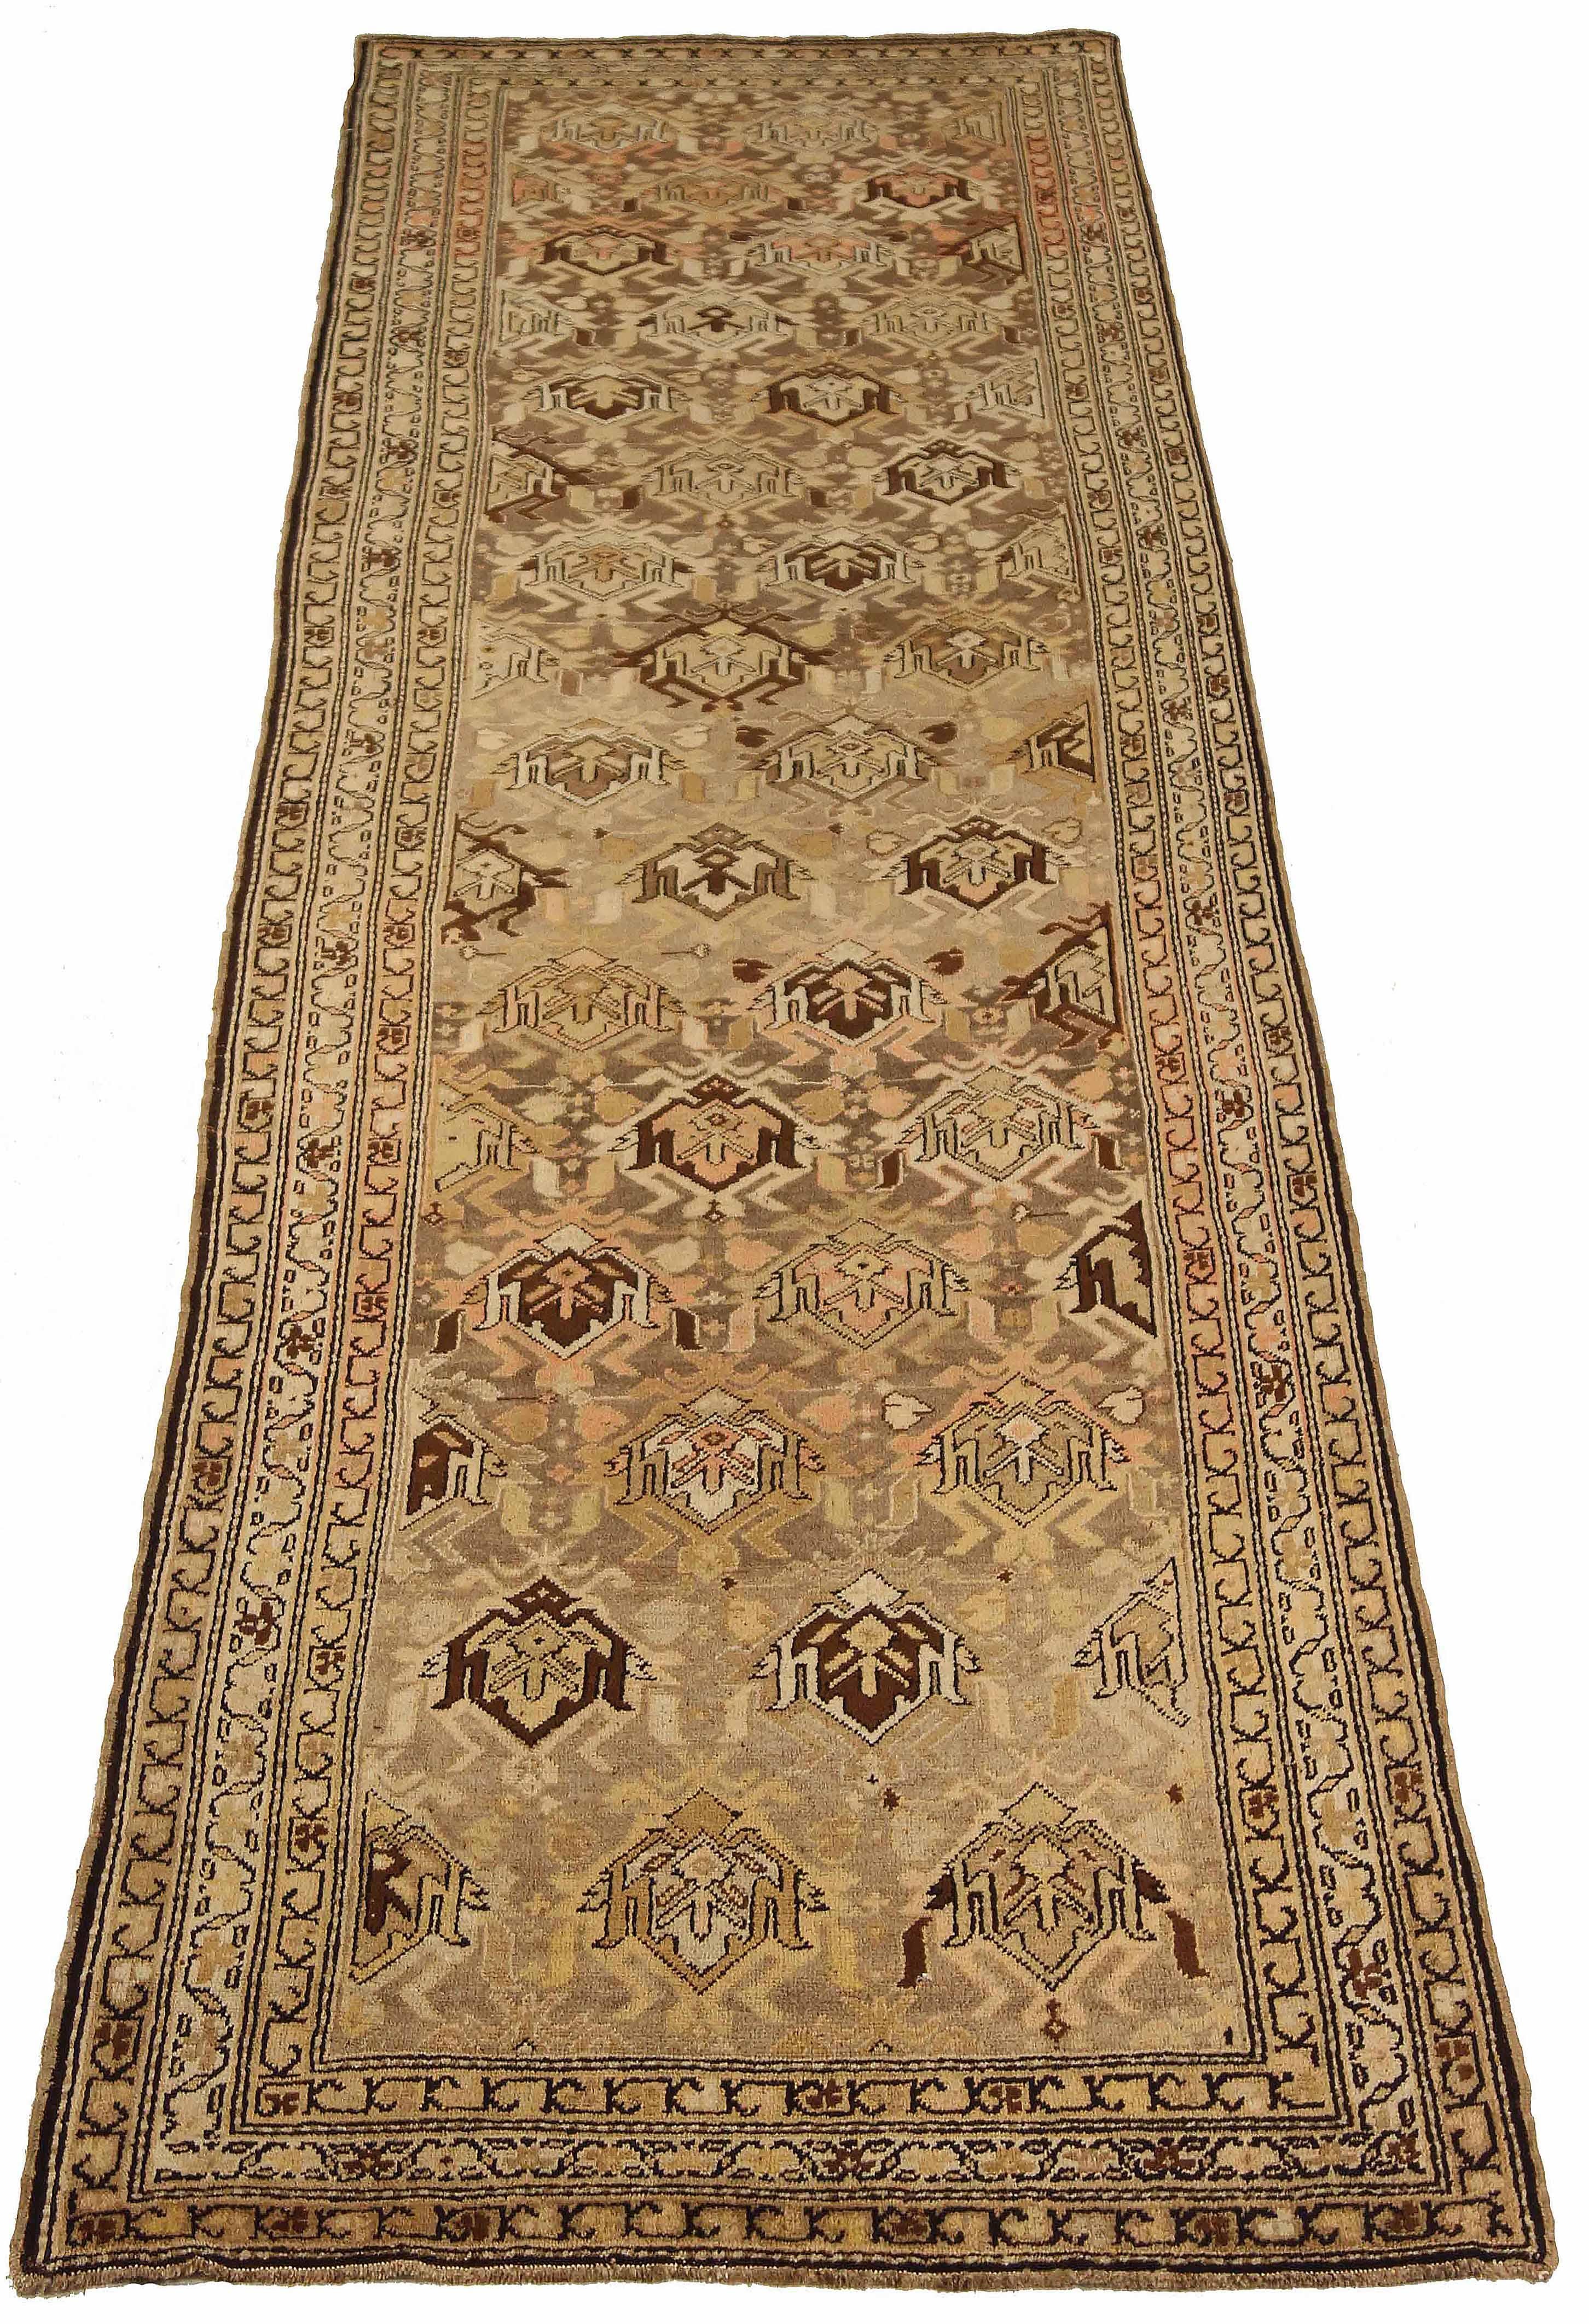 Antique Persian runner rug handwoven from the finest sheep’s wool. It’s colored with all-natural vegetable dyes that are safe for humans and pets. It’s a traditional Meshkin design handwoven by expert artisans. It’s a lovely runner rug that can be